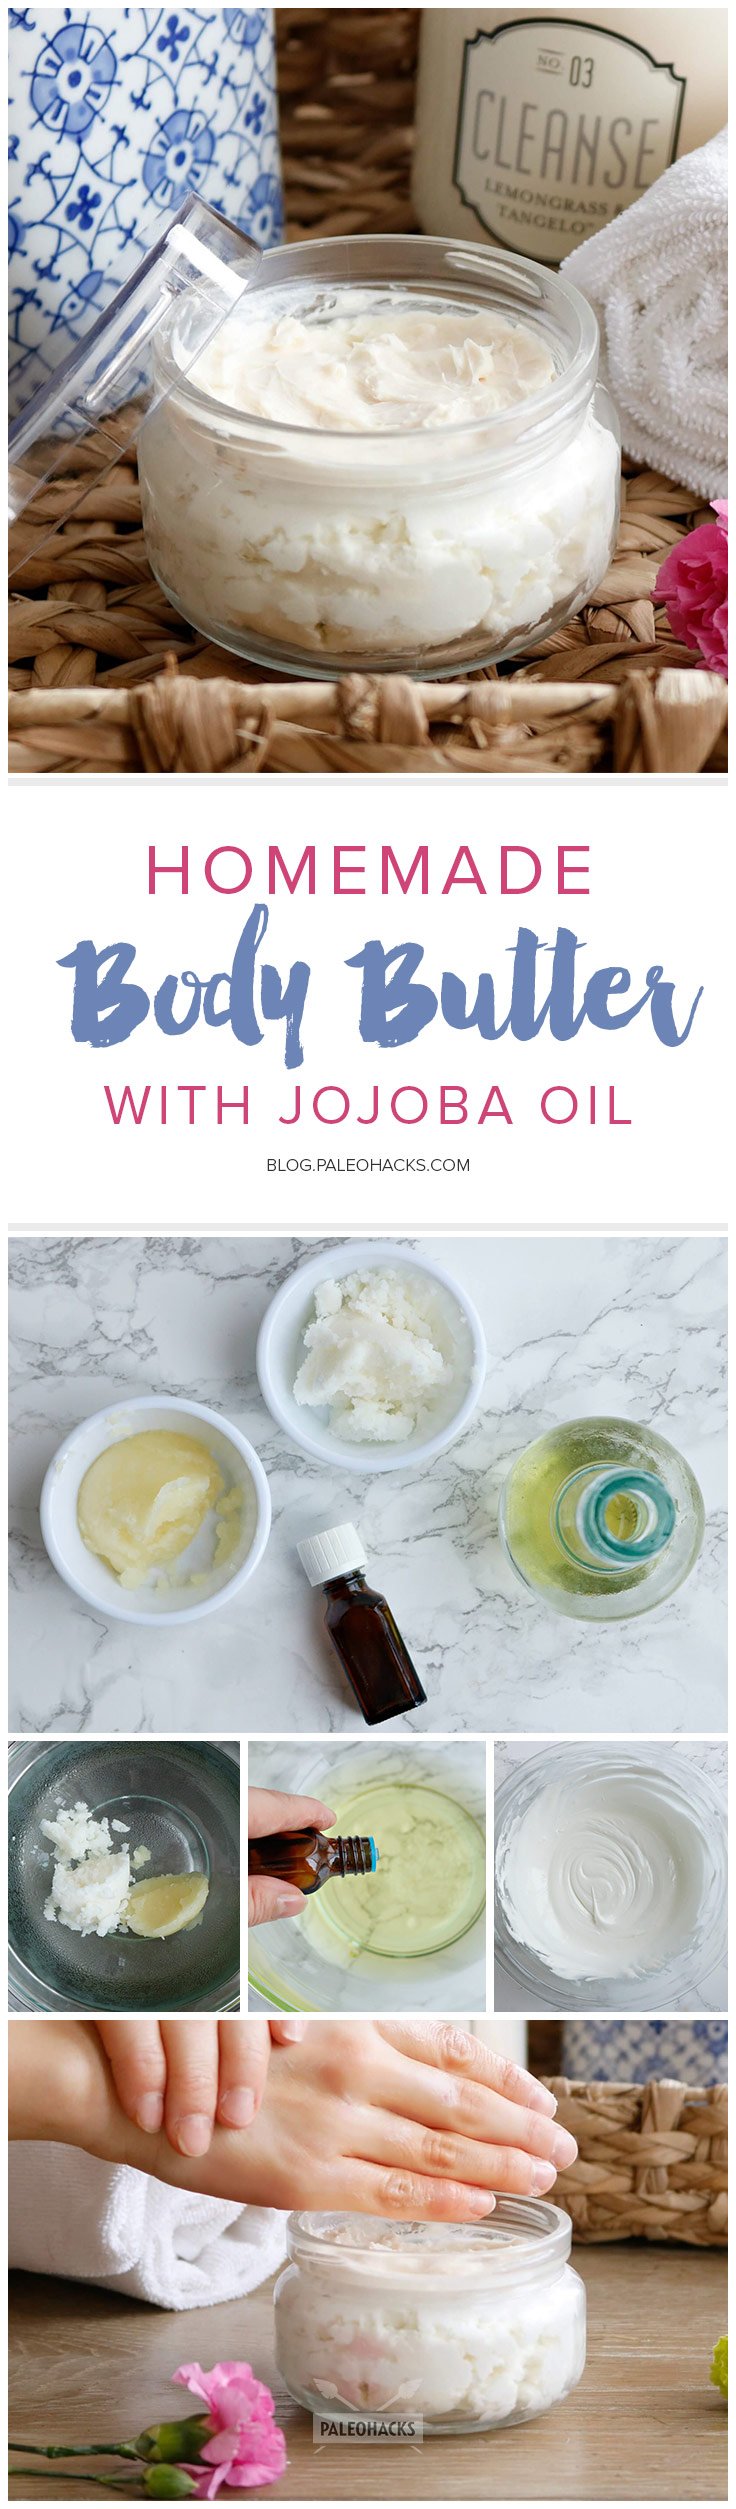 With rich shea and cacao butters, this 4-ingredient body butter keeps skin soft and smooth through even the driest of winters.